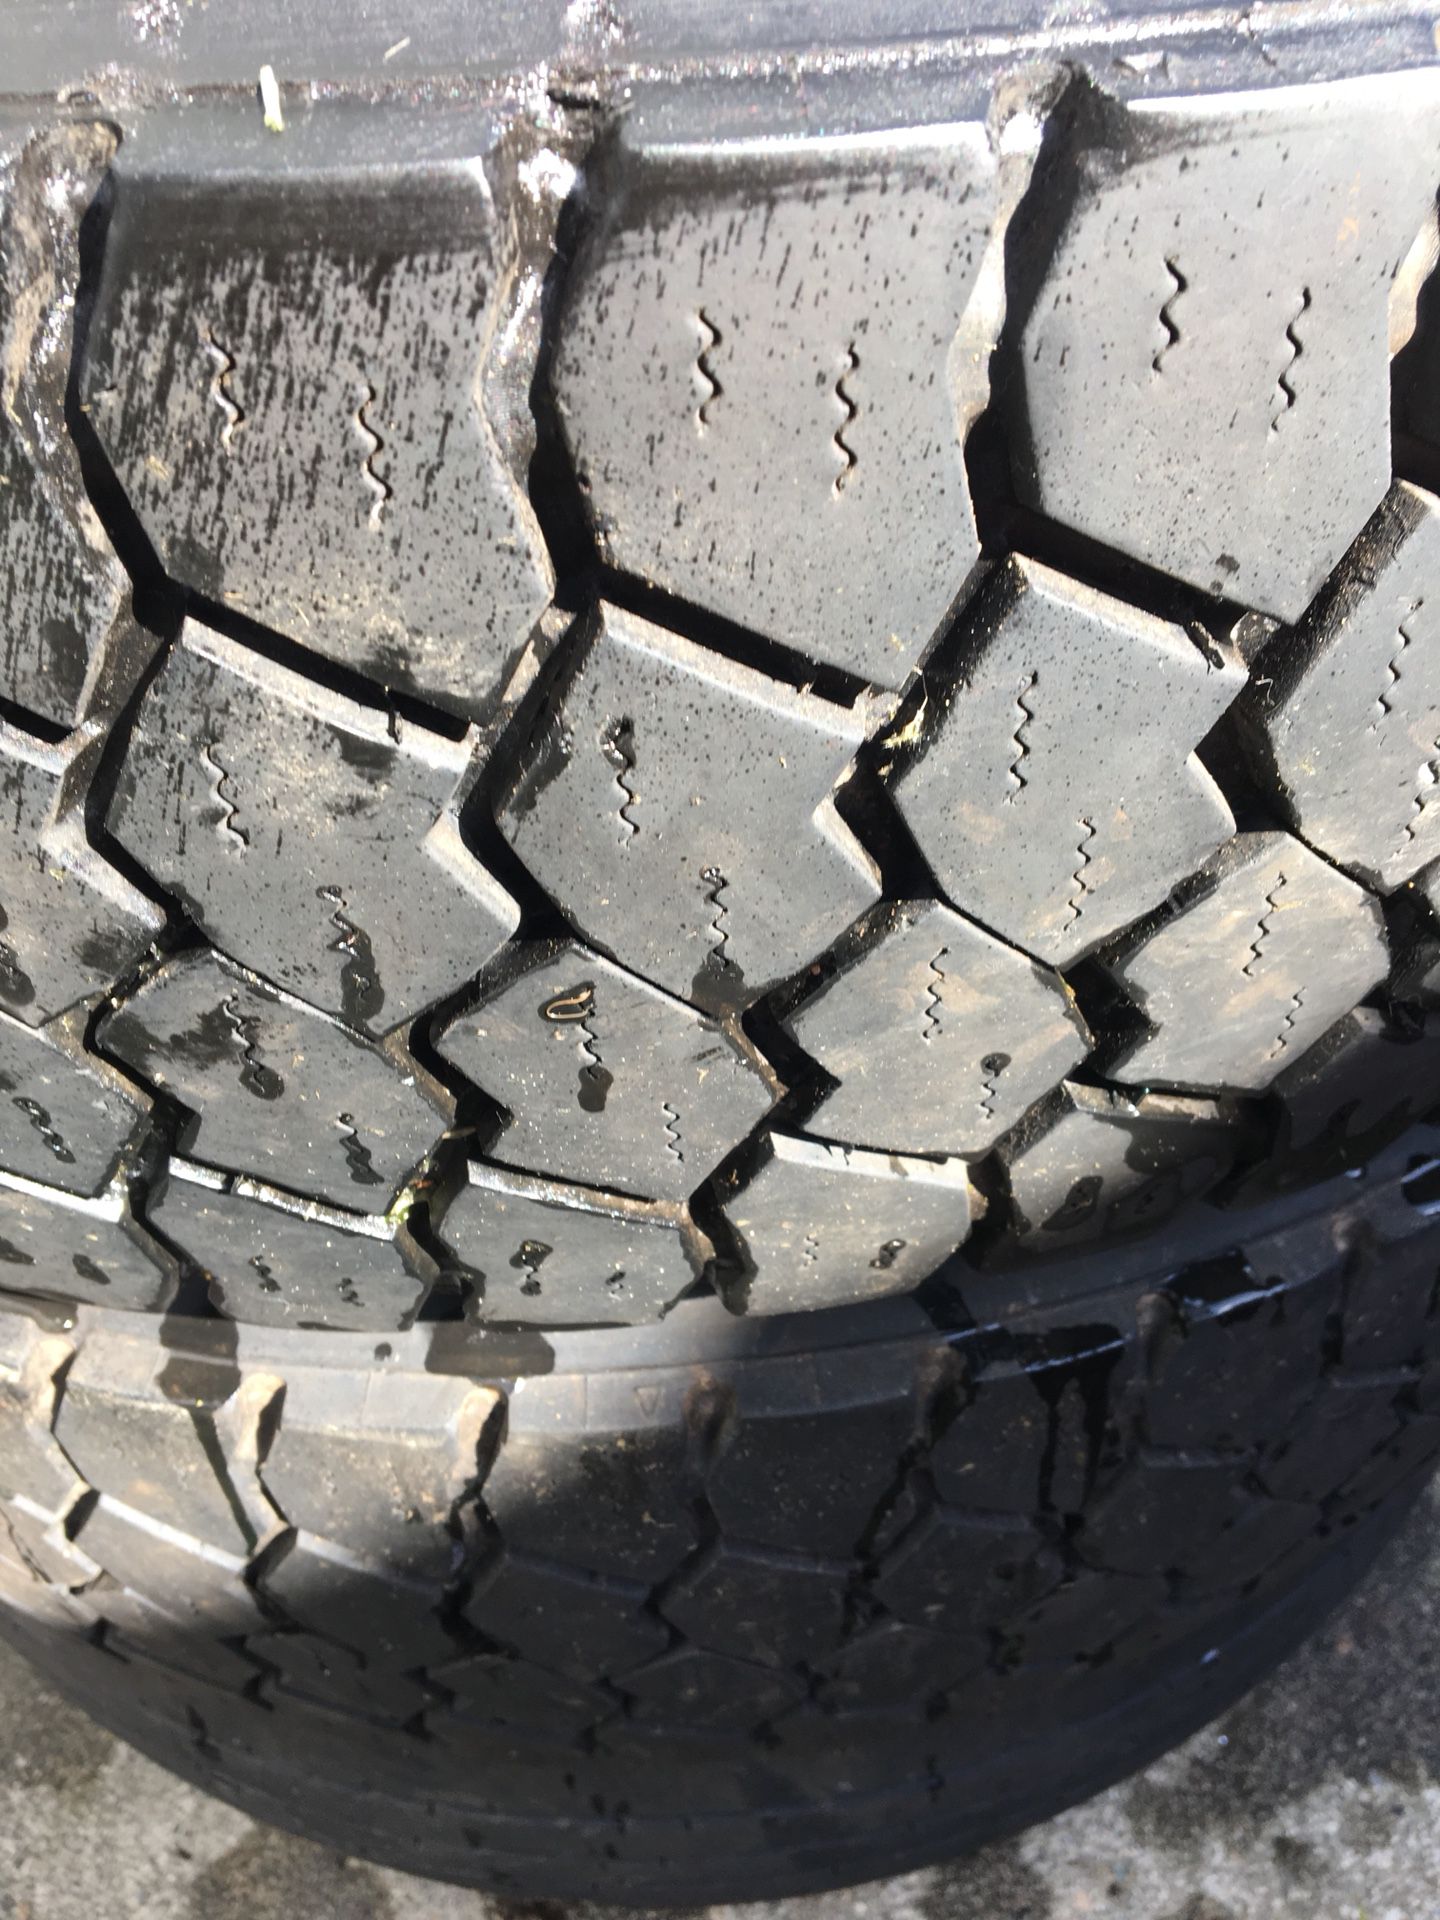 245/70/R19.5 commercial tires